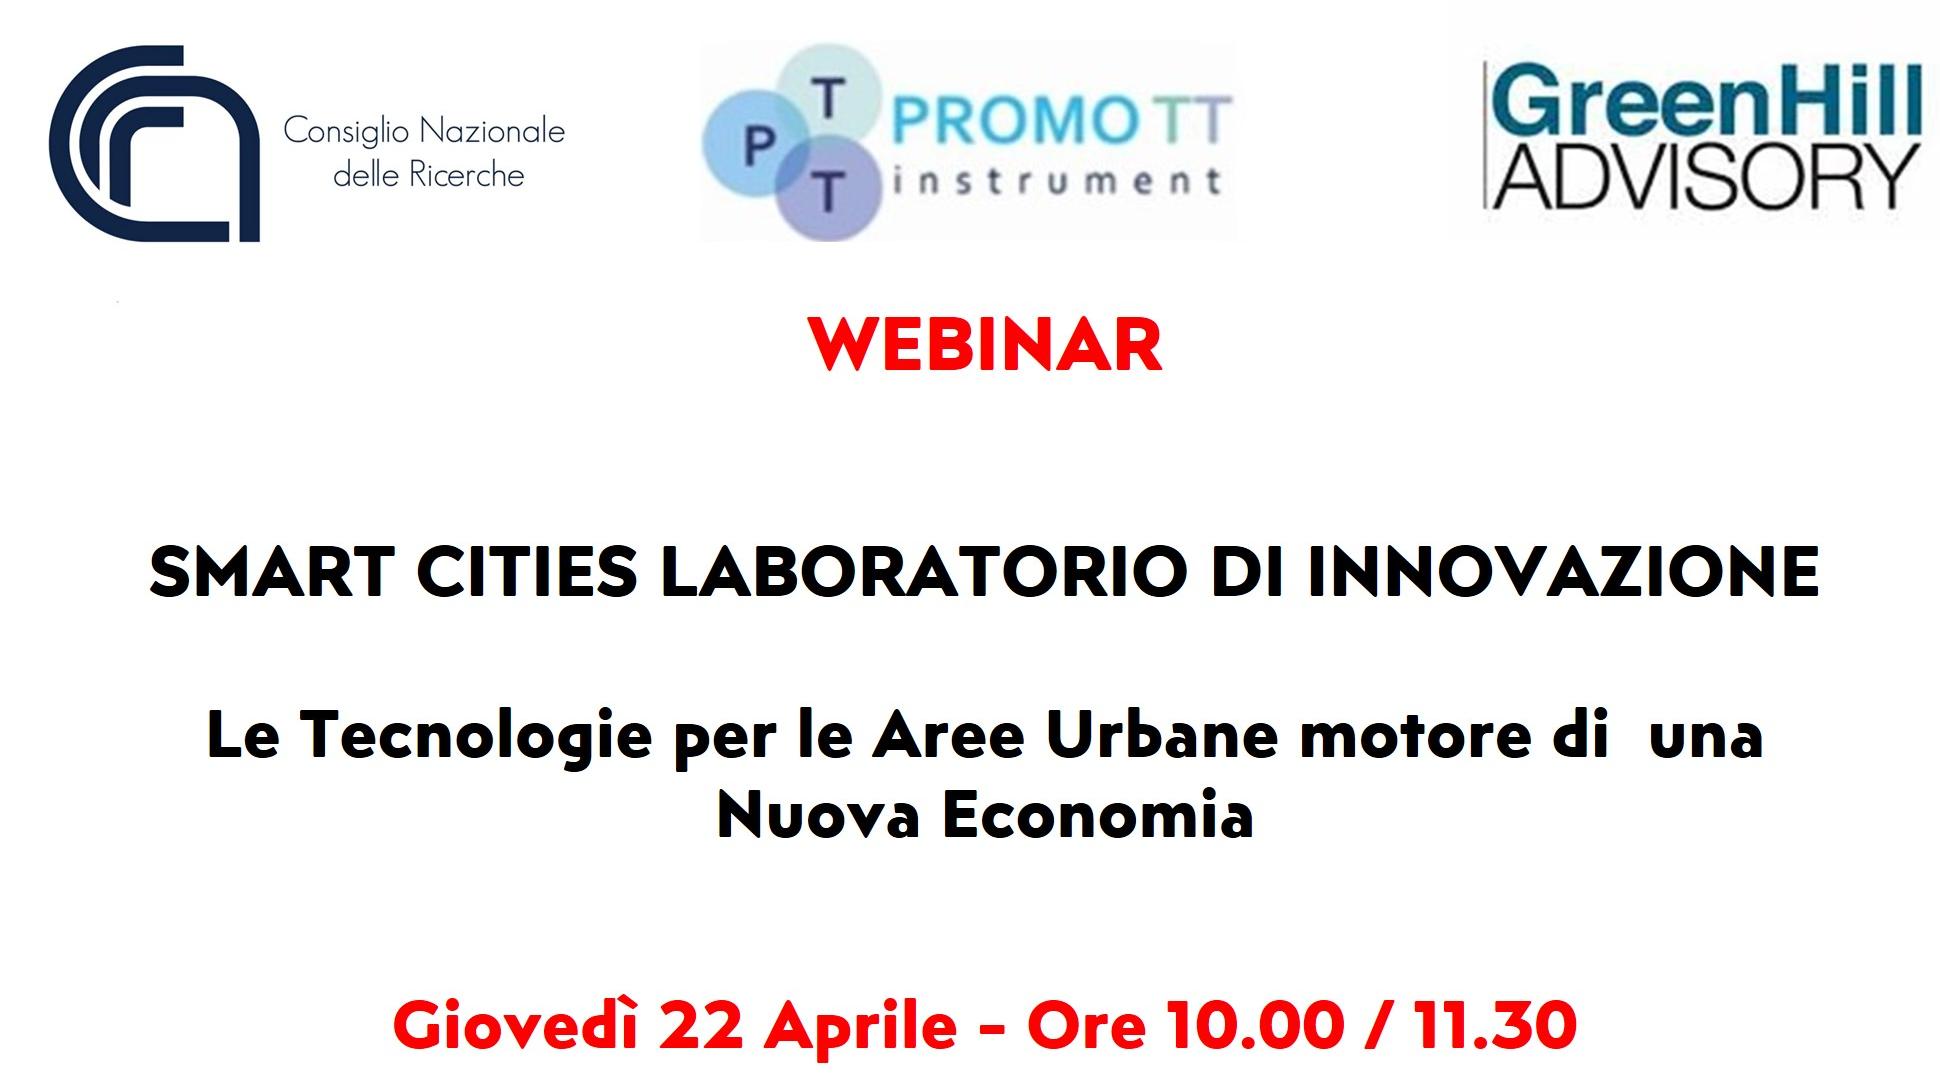 Webinar "Smart cities innovation laboratory - Technologies for Urban Areas driving a New Economy"